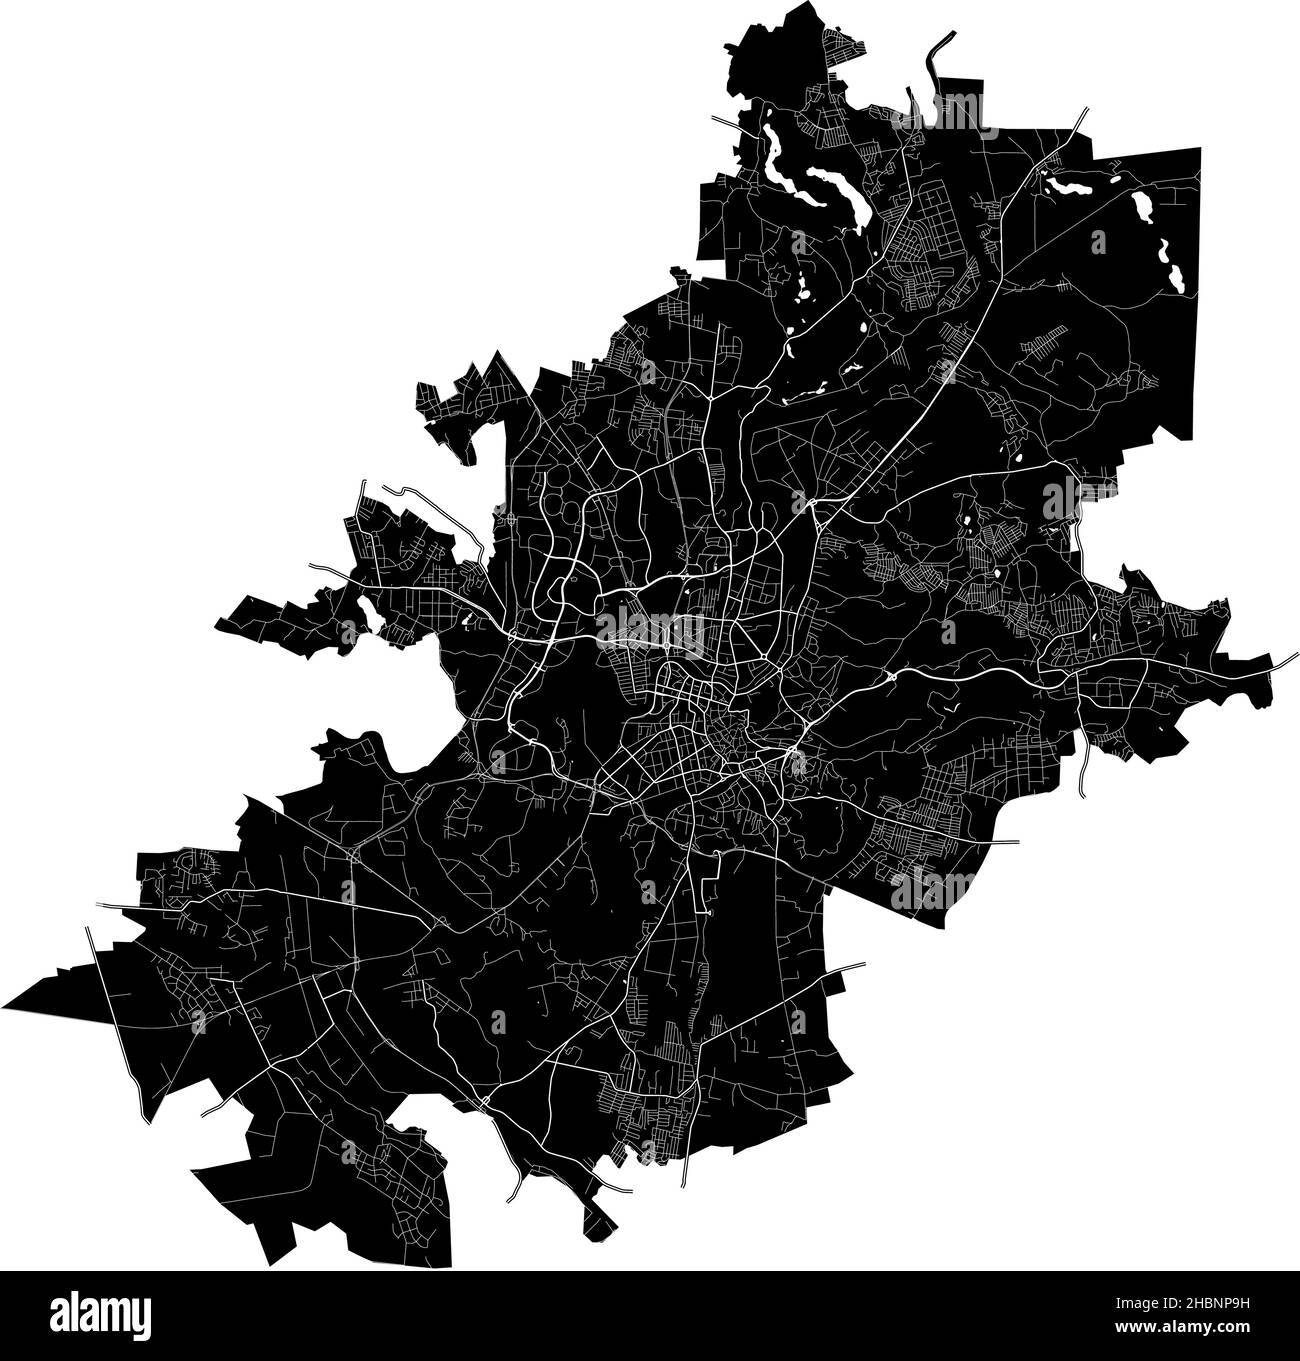 Vilnius, Lithuania, high resolution vector map with city boundaries, and editable paths. The city map was drawn with white areas and lines for main ro Stock Vector